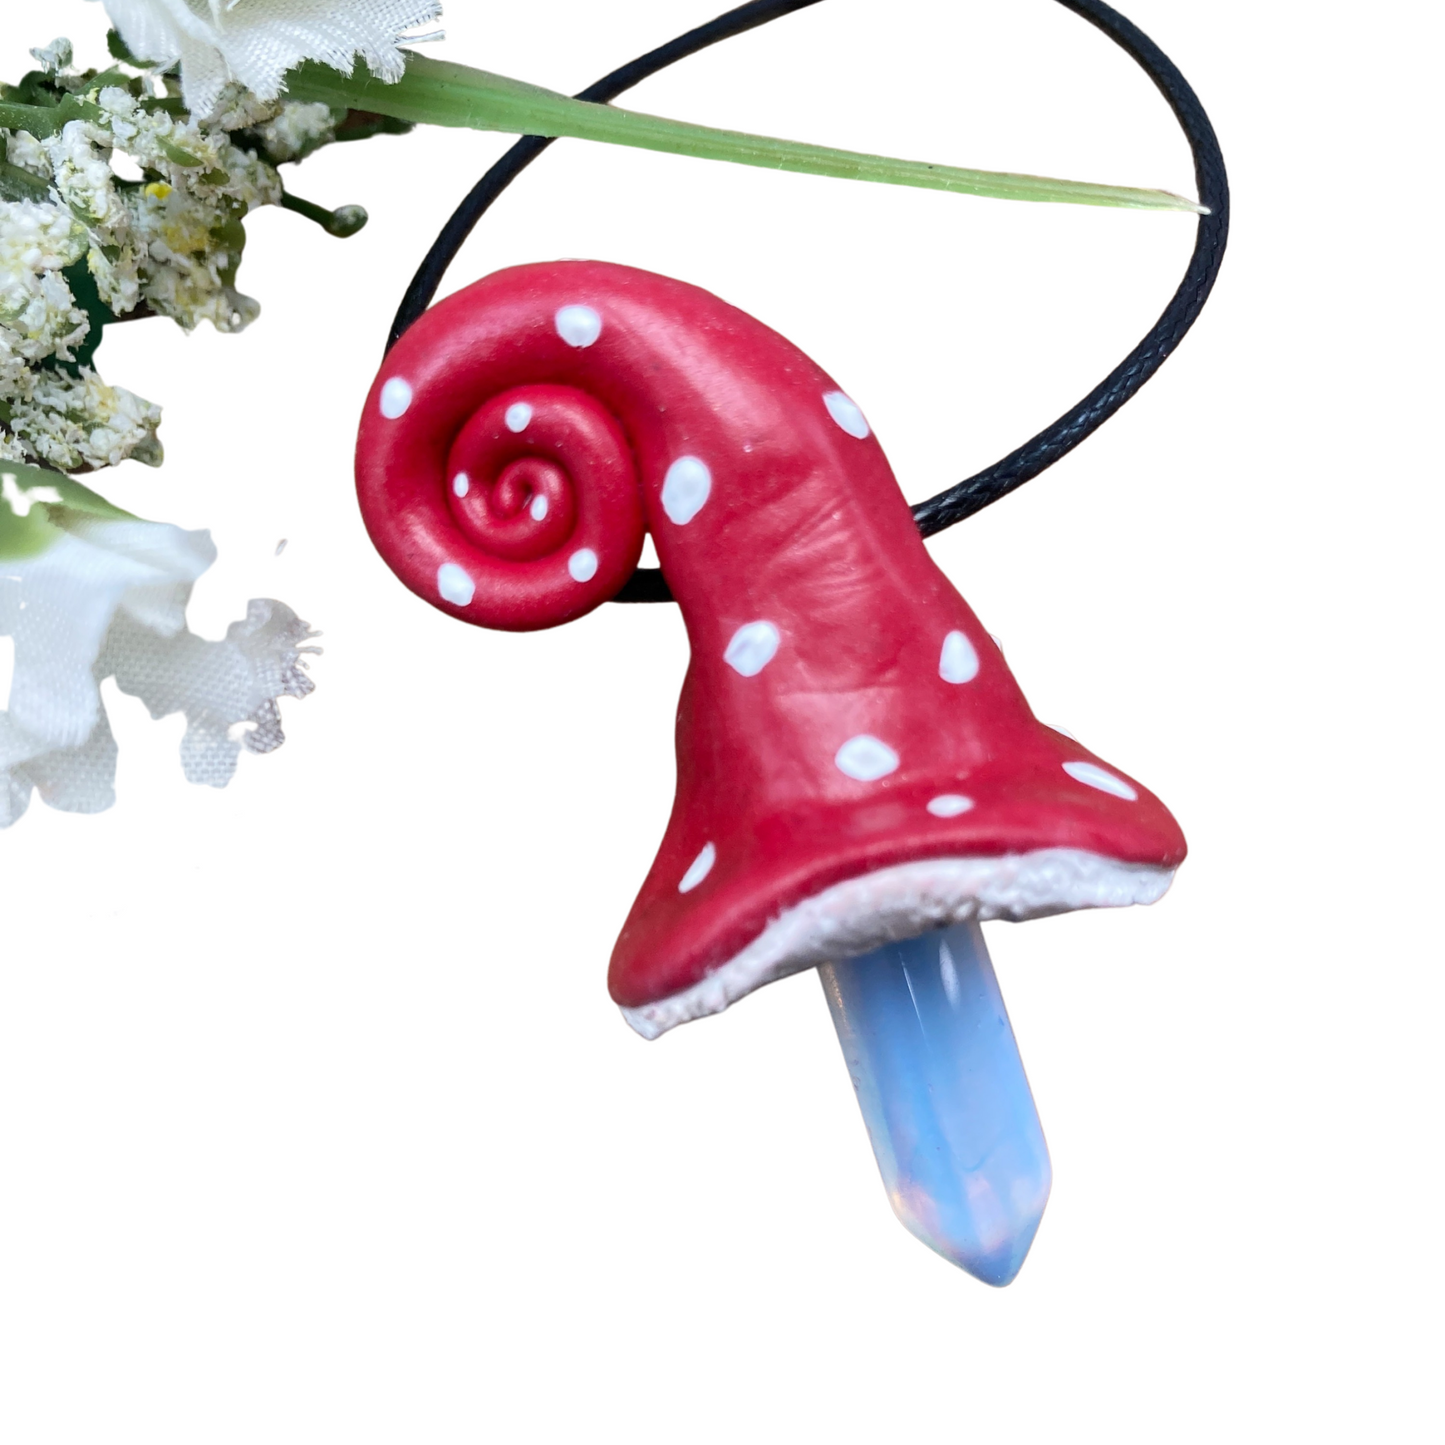 White spotted whimsical mushroom pendant with Opalite crystal and black cord necklace